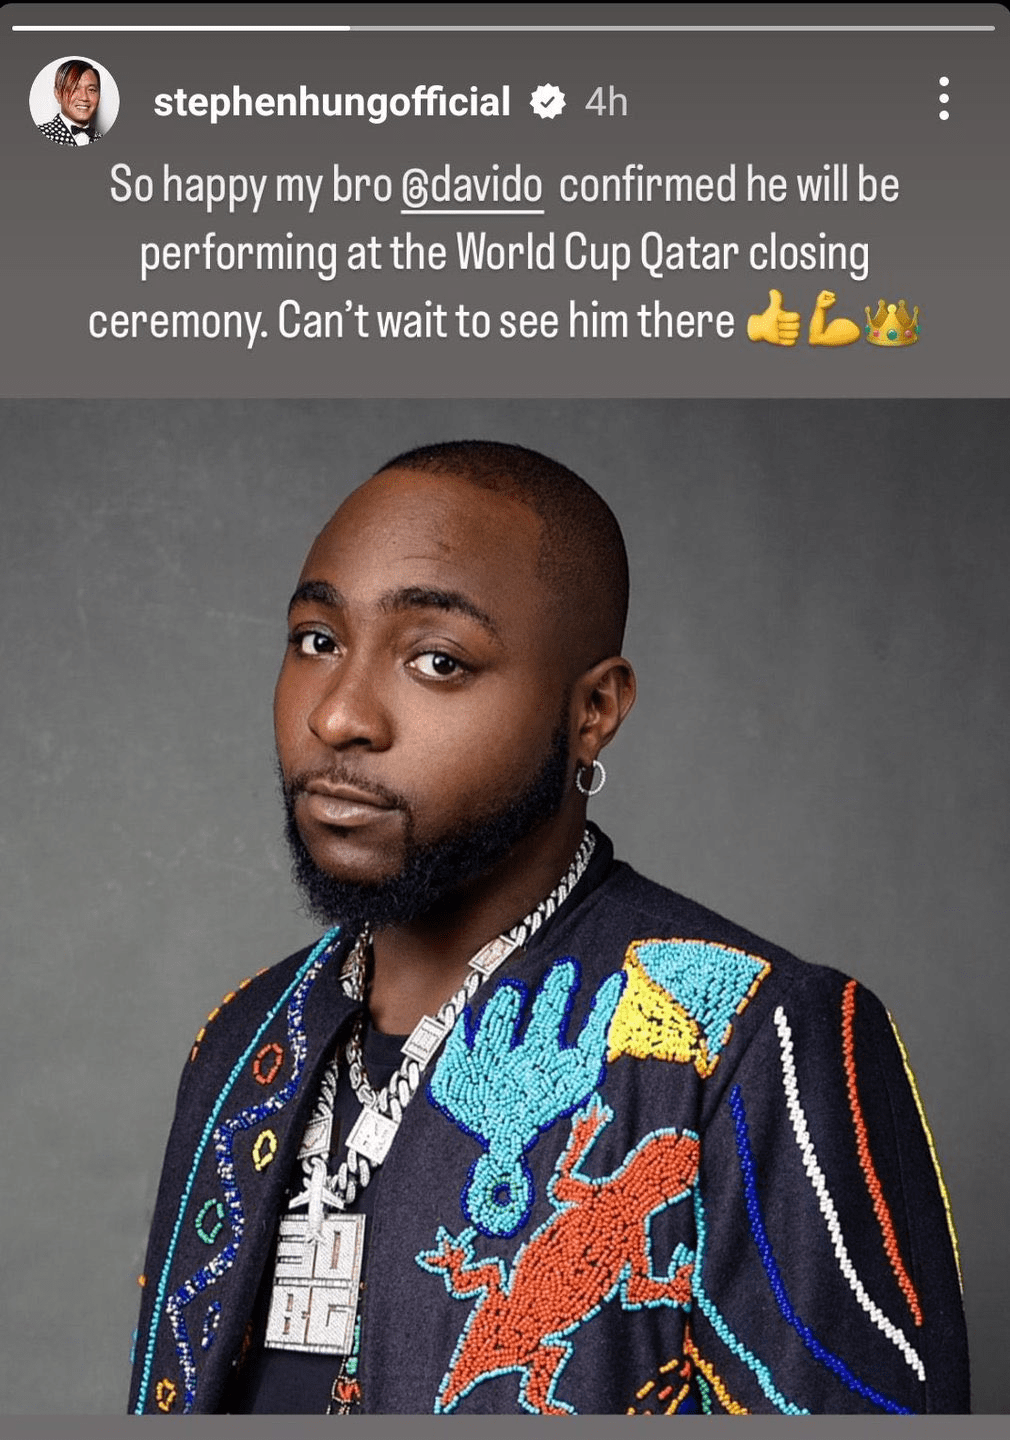 Davido to perform at the World Cup 2022 closing ceremony + other stories